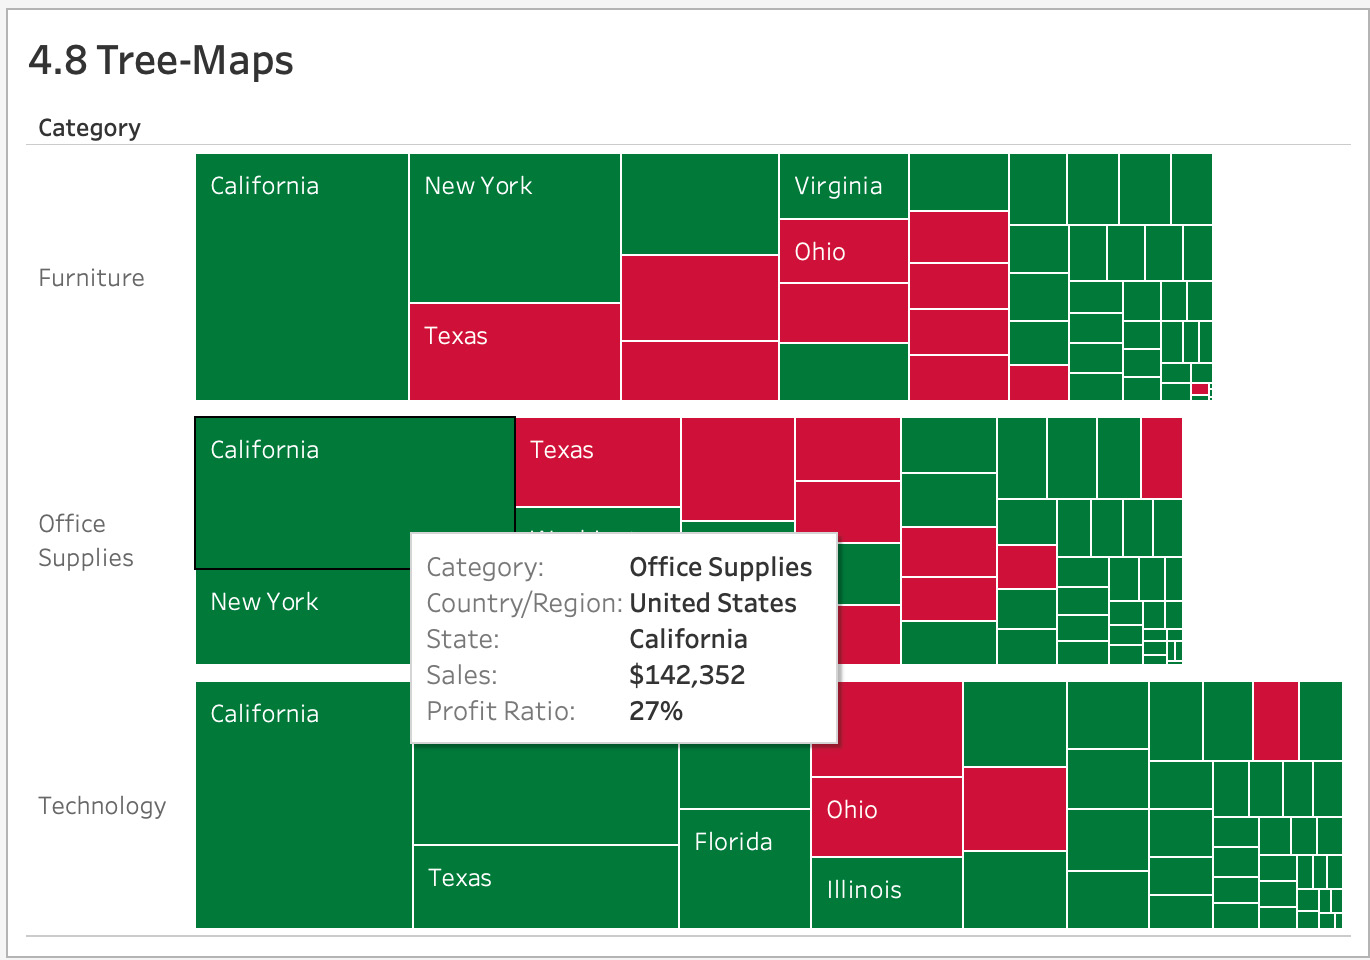 Figure 4.50: Treemap by category and state with red/green color coding
